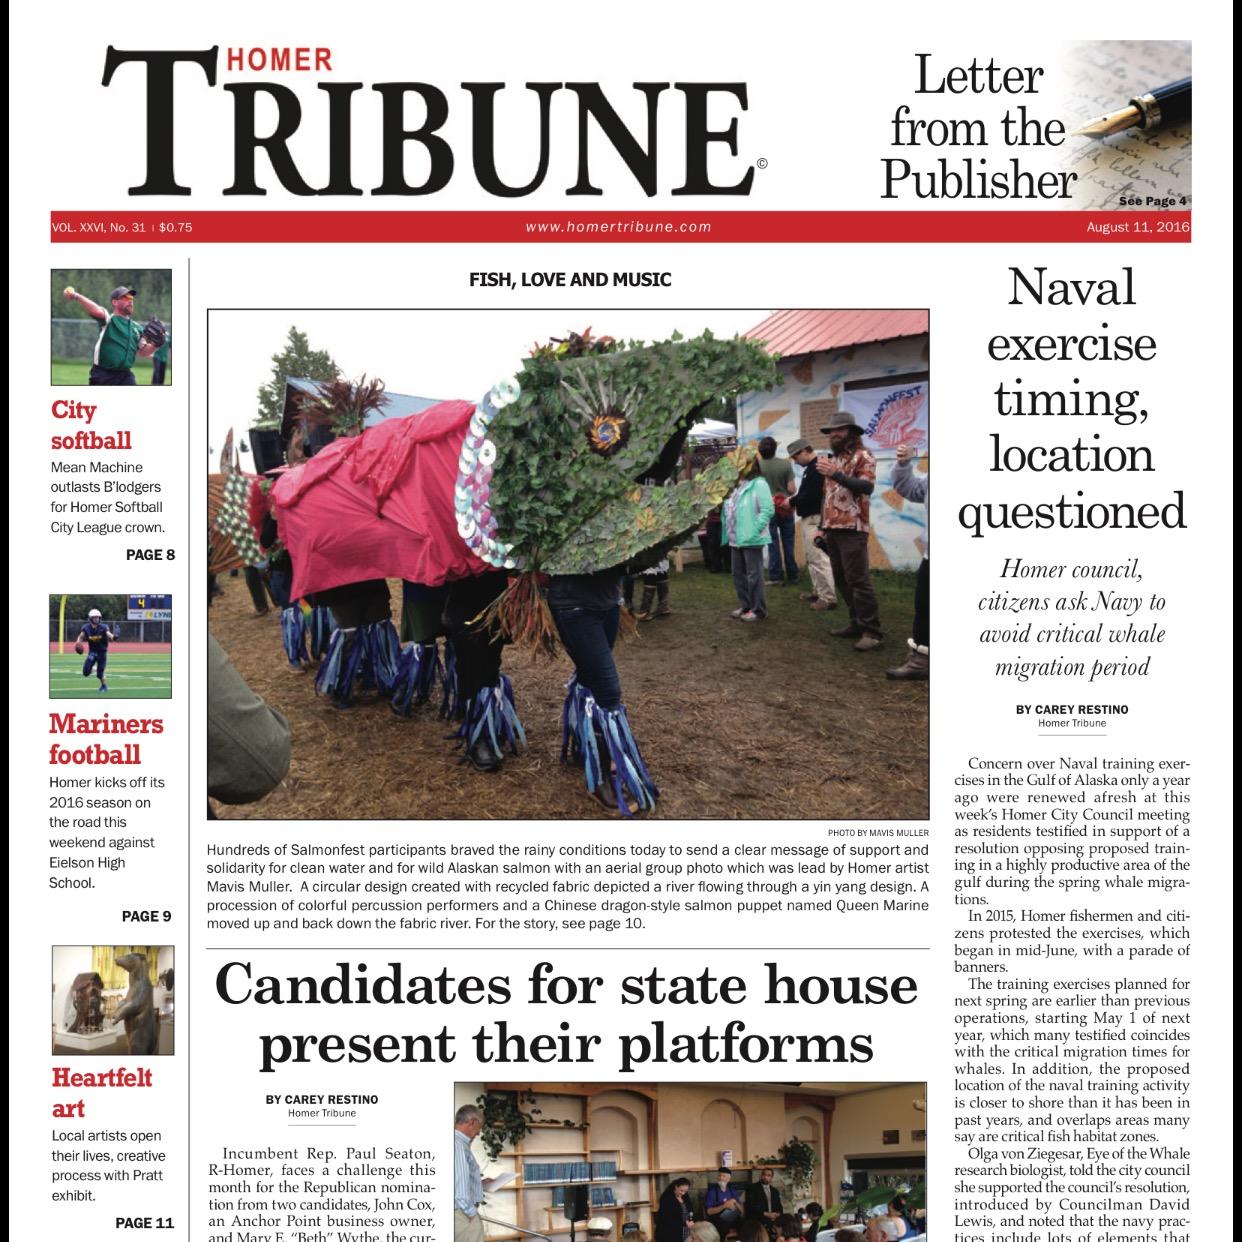 The first print issue of the Homer Tribune since June came out on June 11. (Image Courtesy of Homer Tribune)